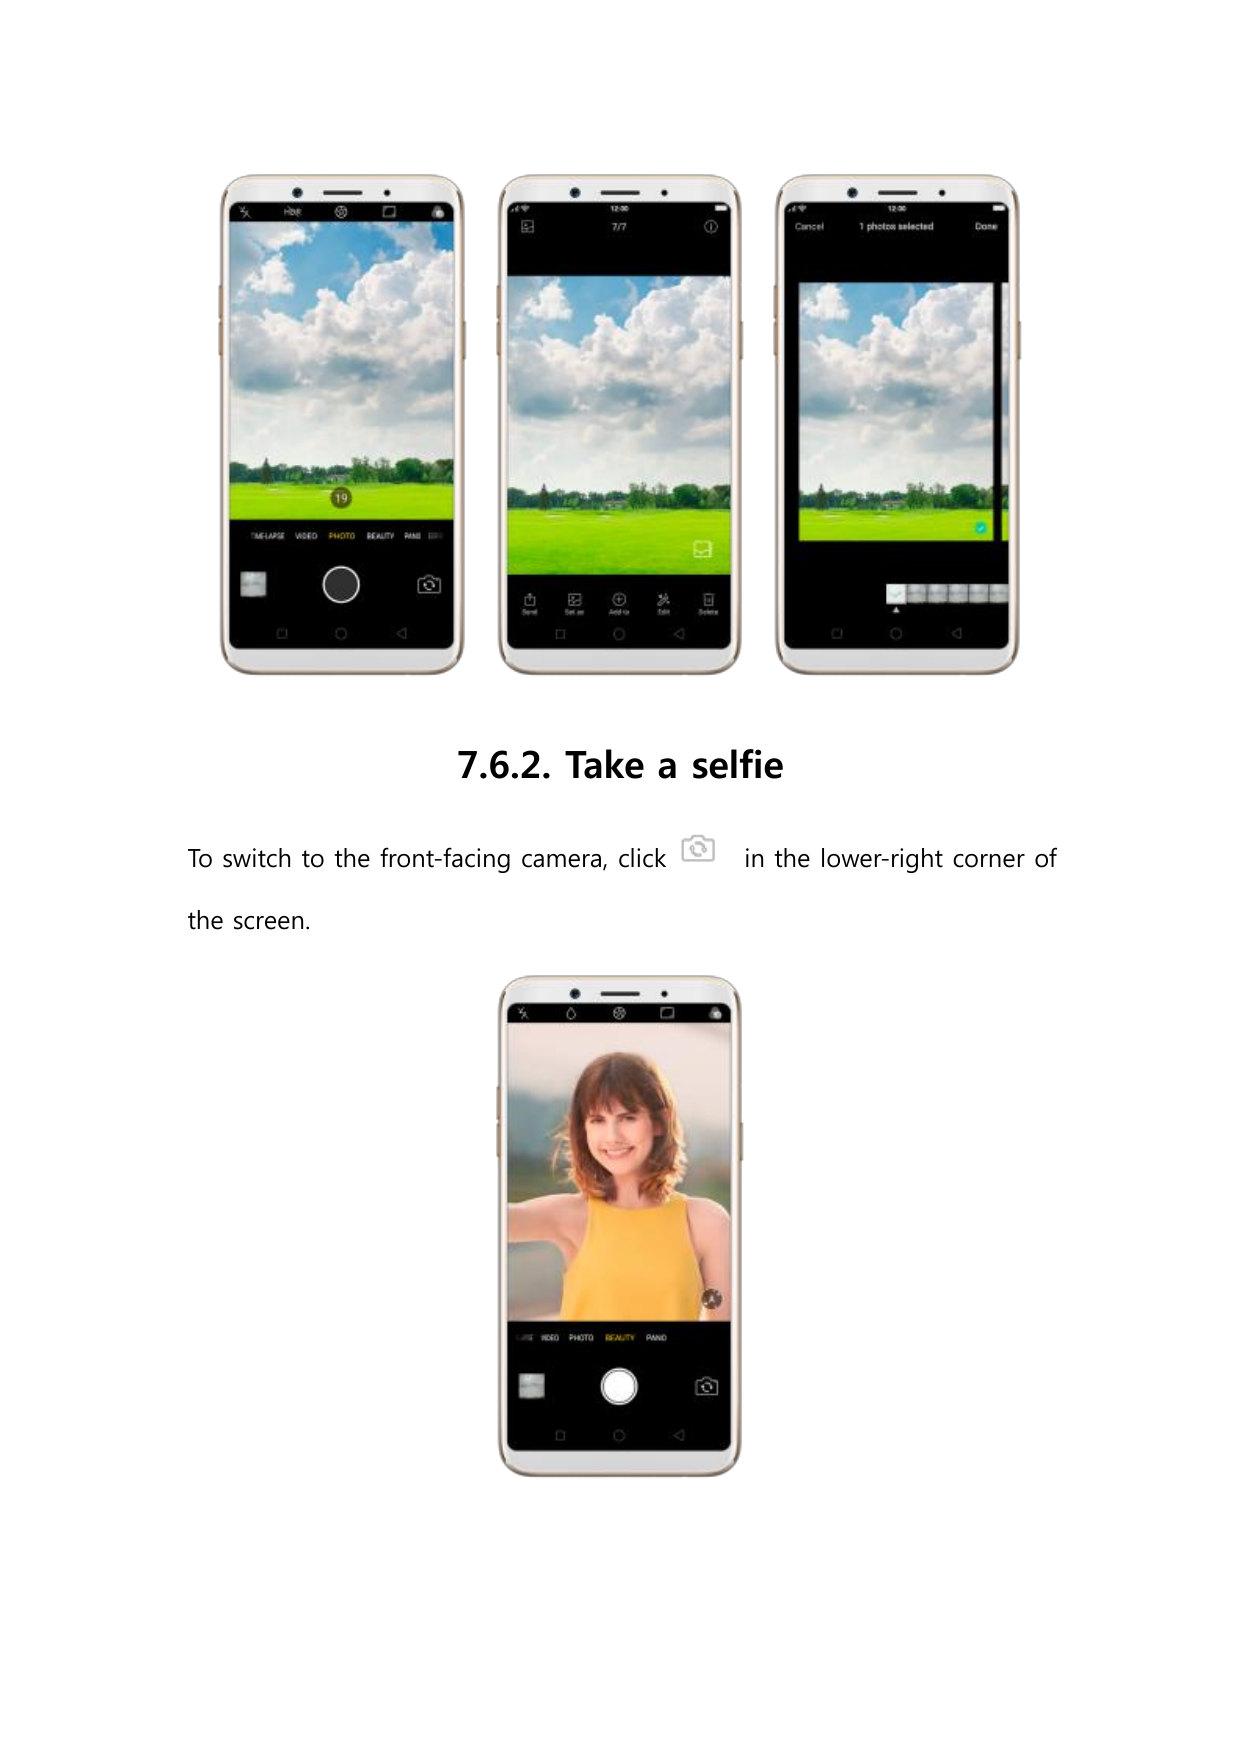 7.6.2. Take a selfieTo switch to the front-facing camera, clickthe screen.in the lower-right corner of